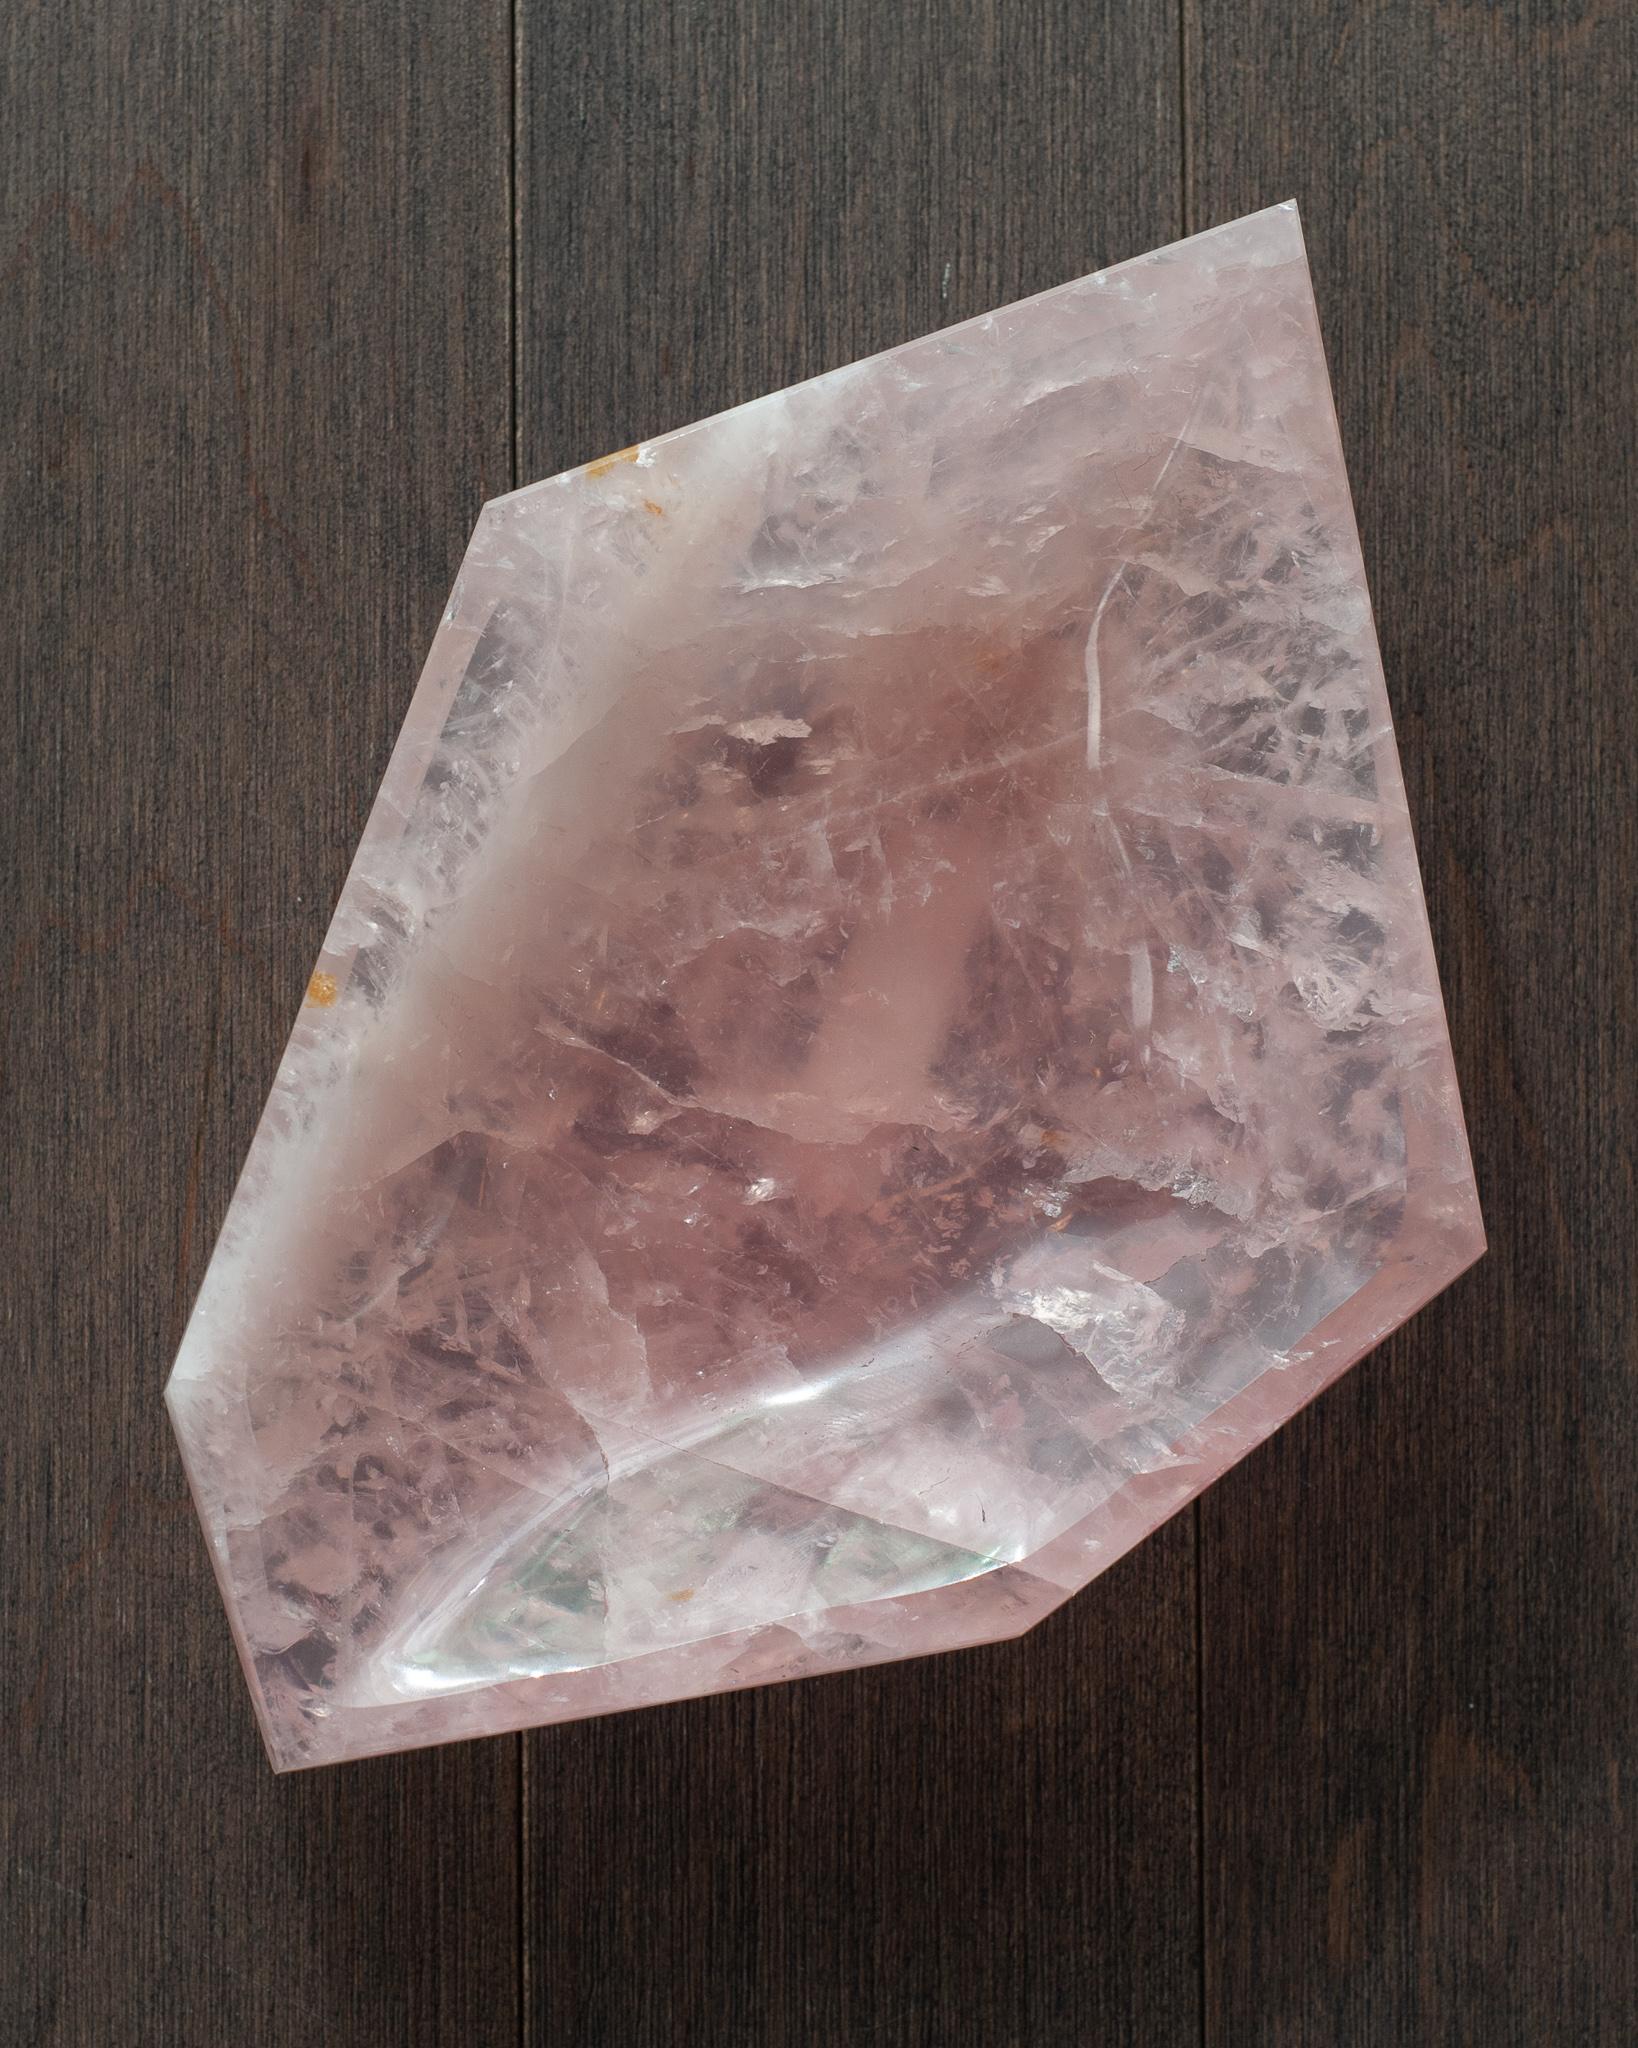 A stunning contemporary vibrant pink rose quartz bowl with angular faceted shape. Invite the healing energy of rose quartz into your interior with a beautiful and functional bowl. Each is cut like a gemstone and is a saturated shade of pink.